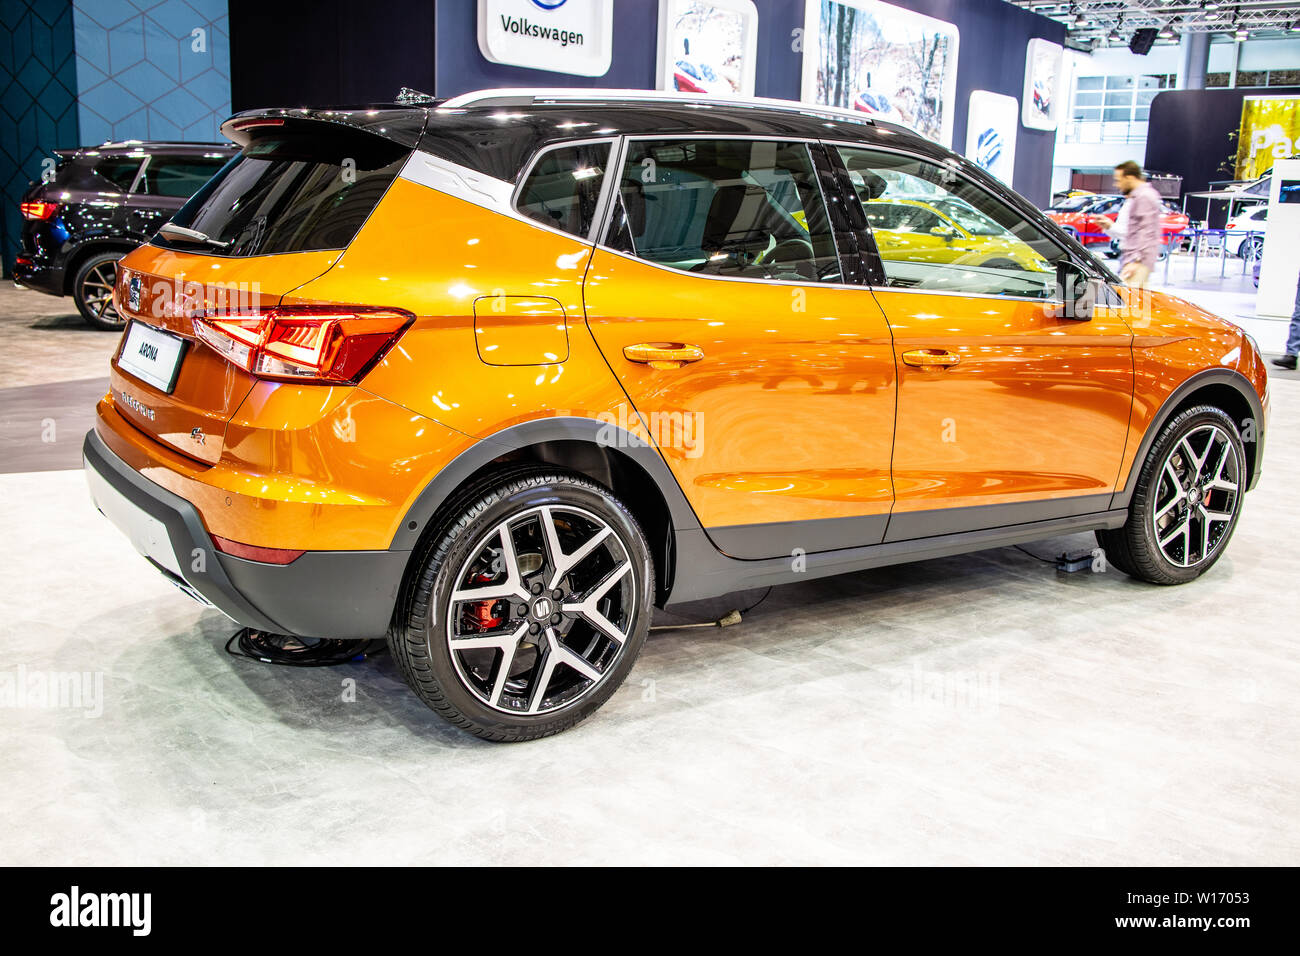 Poznan, Poland, March 2019 Seat Arona, Poznan International Motor Show, mini crossover SUV manufactured by Spanish automobile manufacturer SEAT Stock Photo